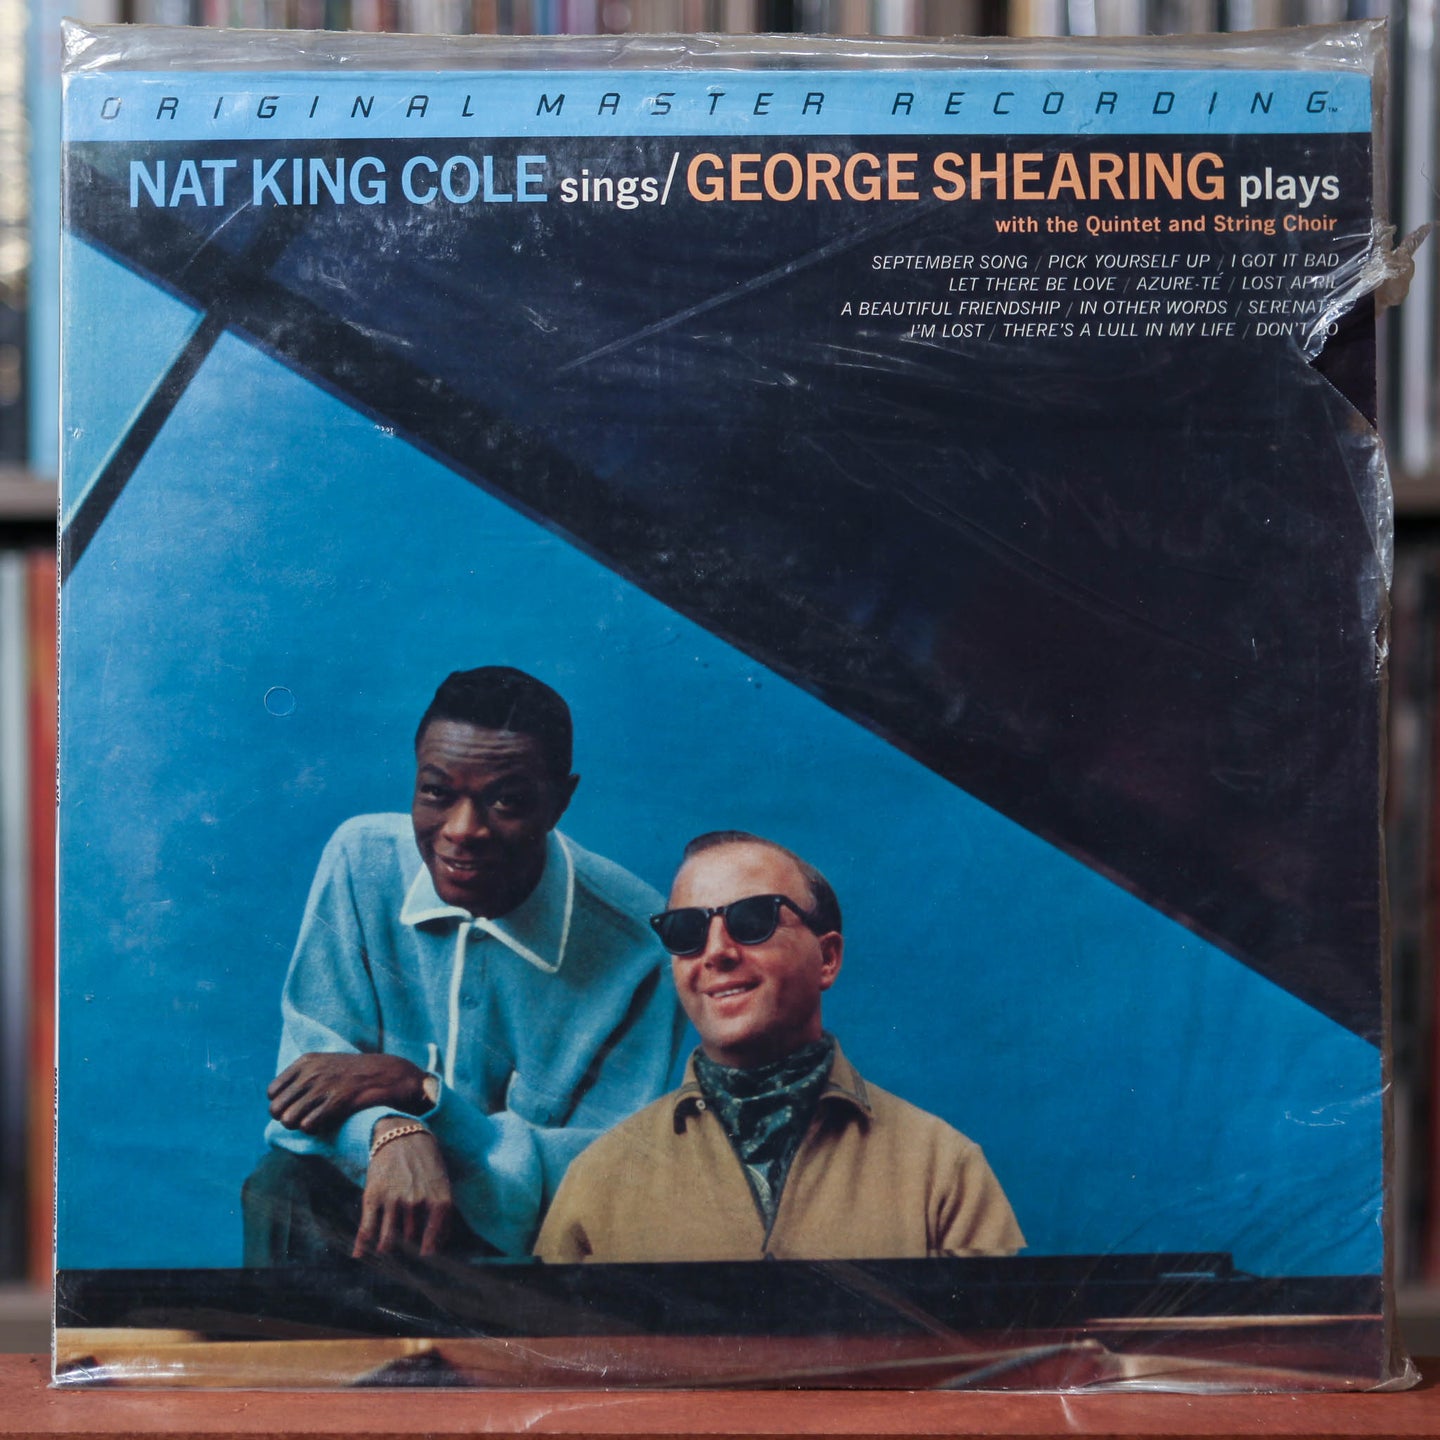 Nat King Cole & George Shearing - Nat King Cole Sings/George Shearing Plays - MFSL 1-081 - 1980 Mobile Fidelity Sound Lab, SEALED